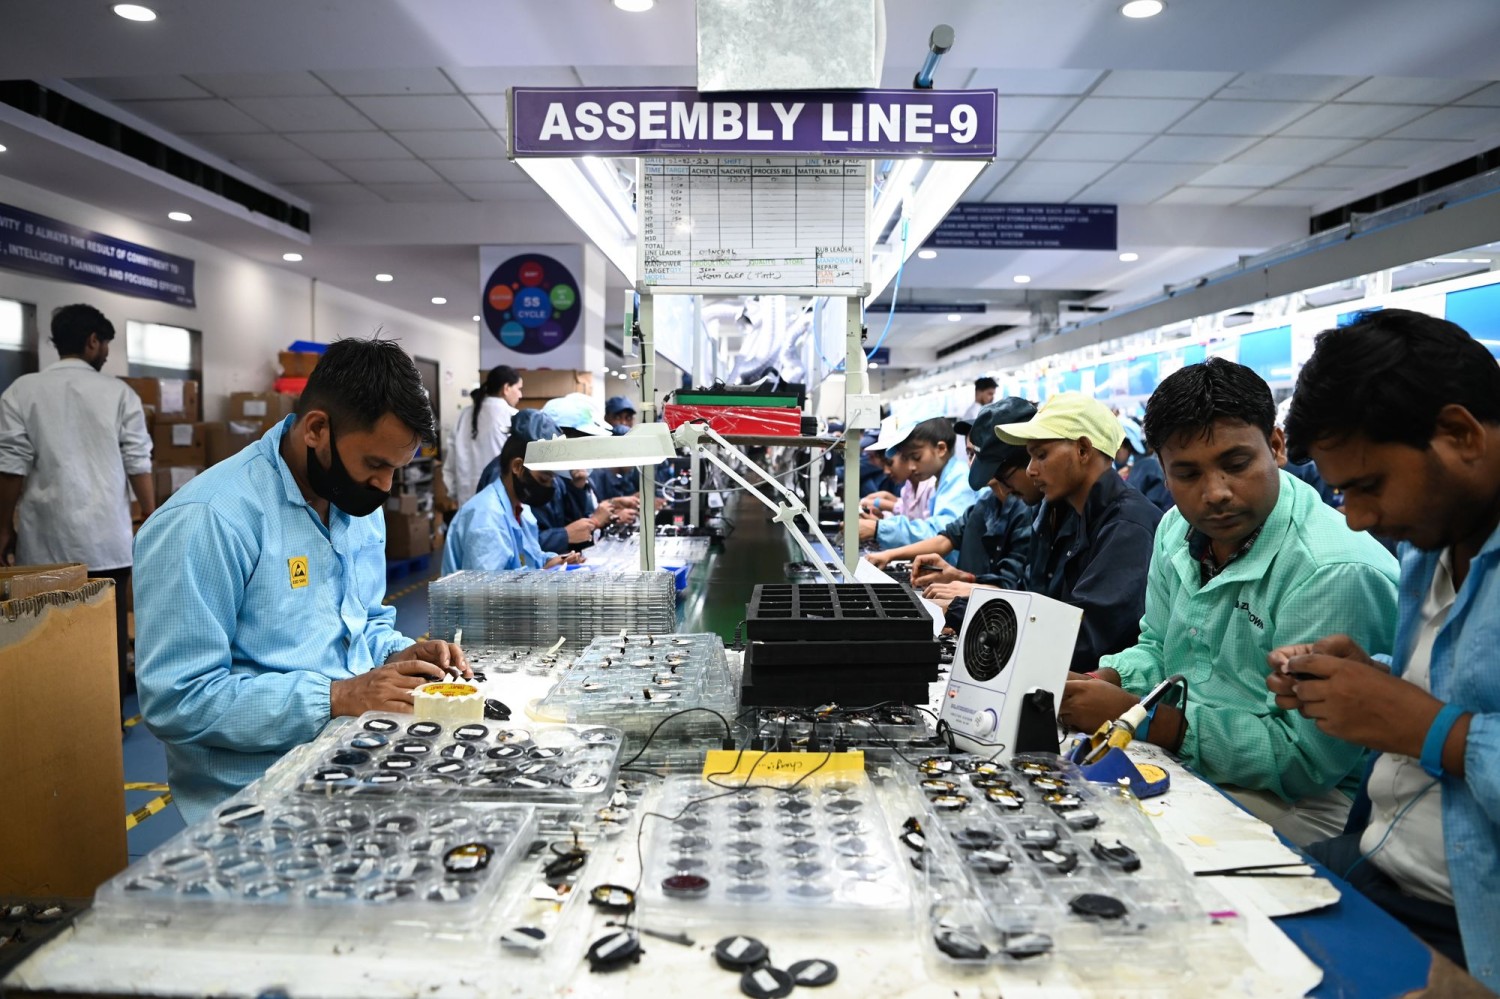 Manufacturers Leaving China Find a Home With Indian Startups India is looking to build up its factory base, and venture-capital investors are noticing.